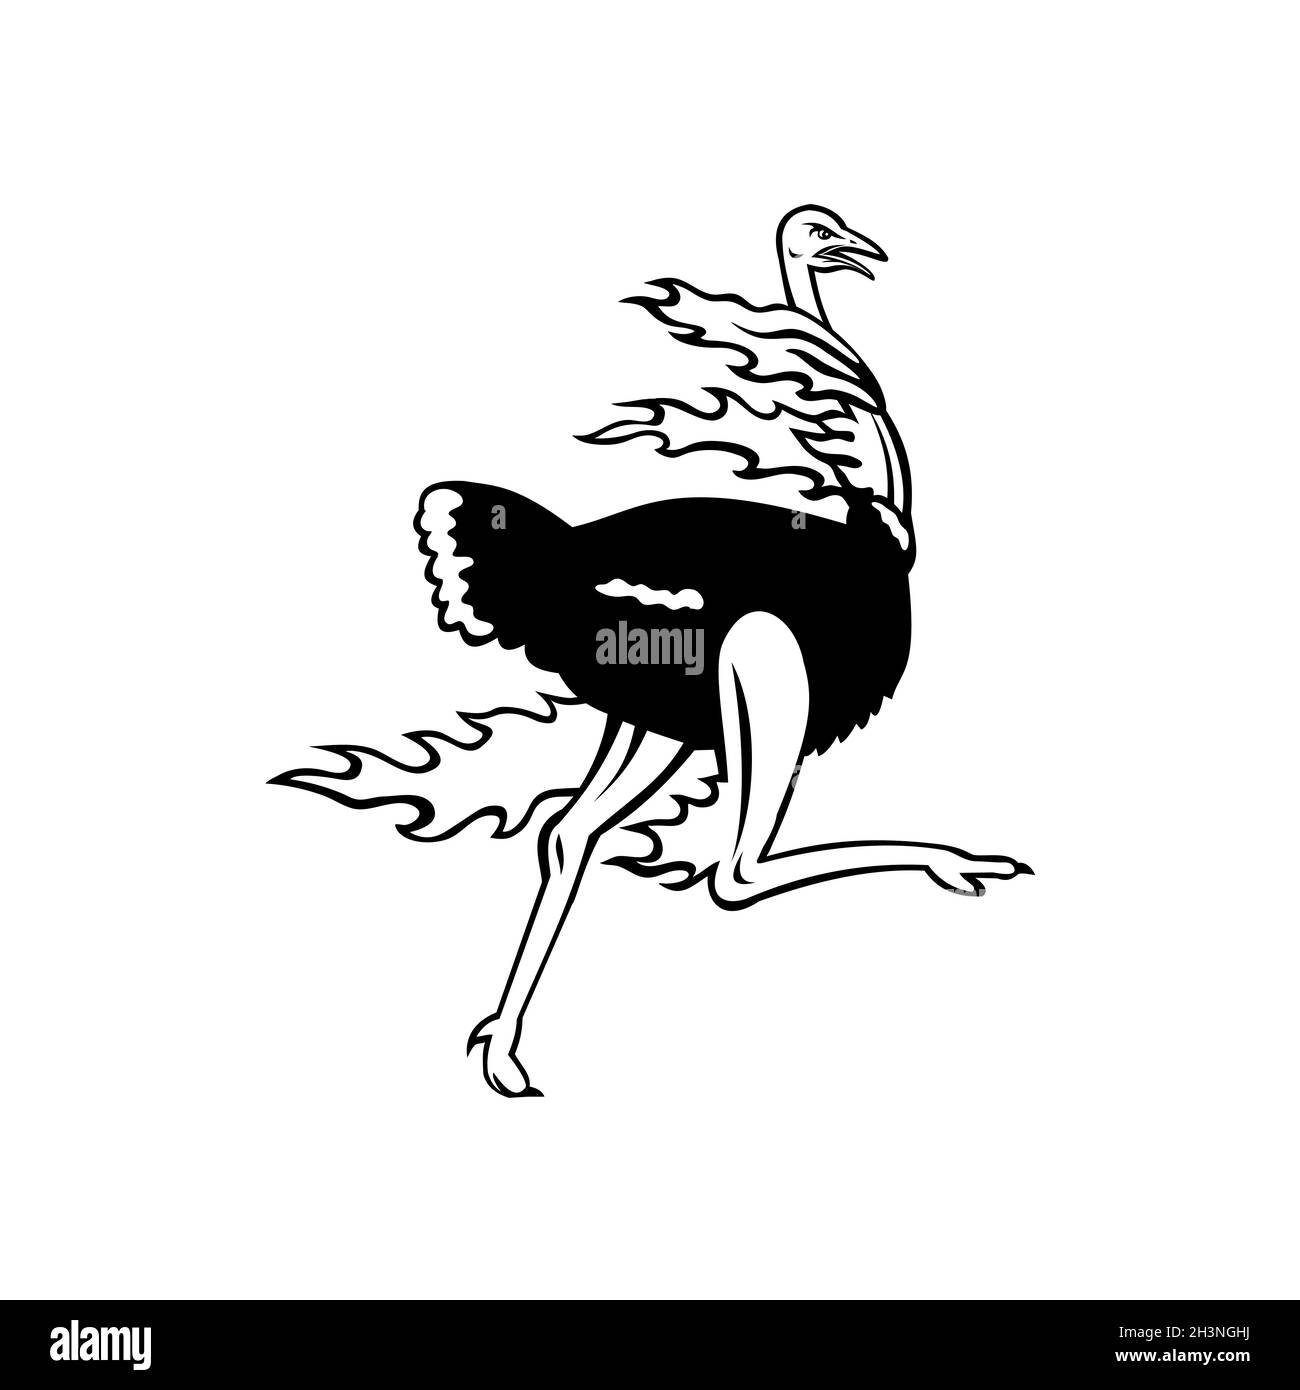 Common Ostrich Running While on Fire Viewed from Side Mascot Black and White Stock Photo